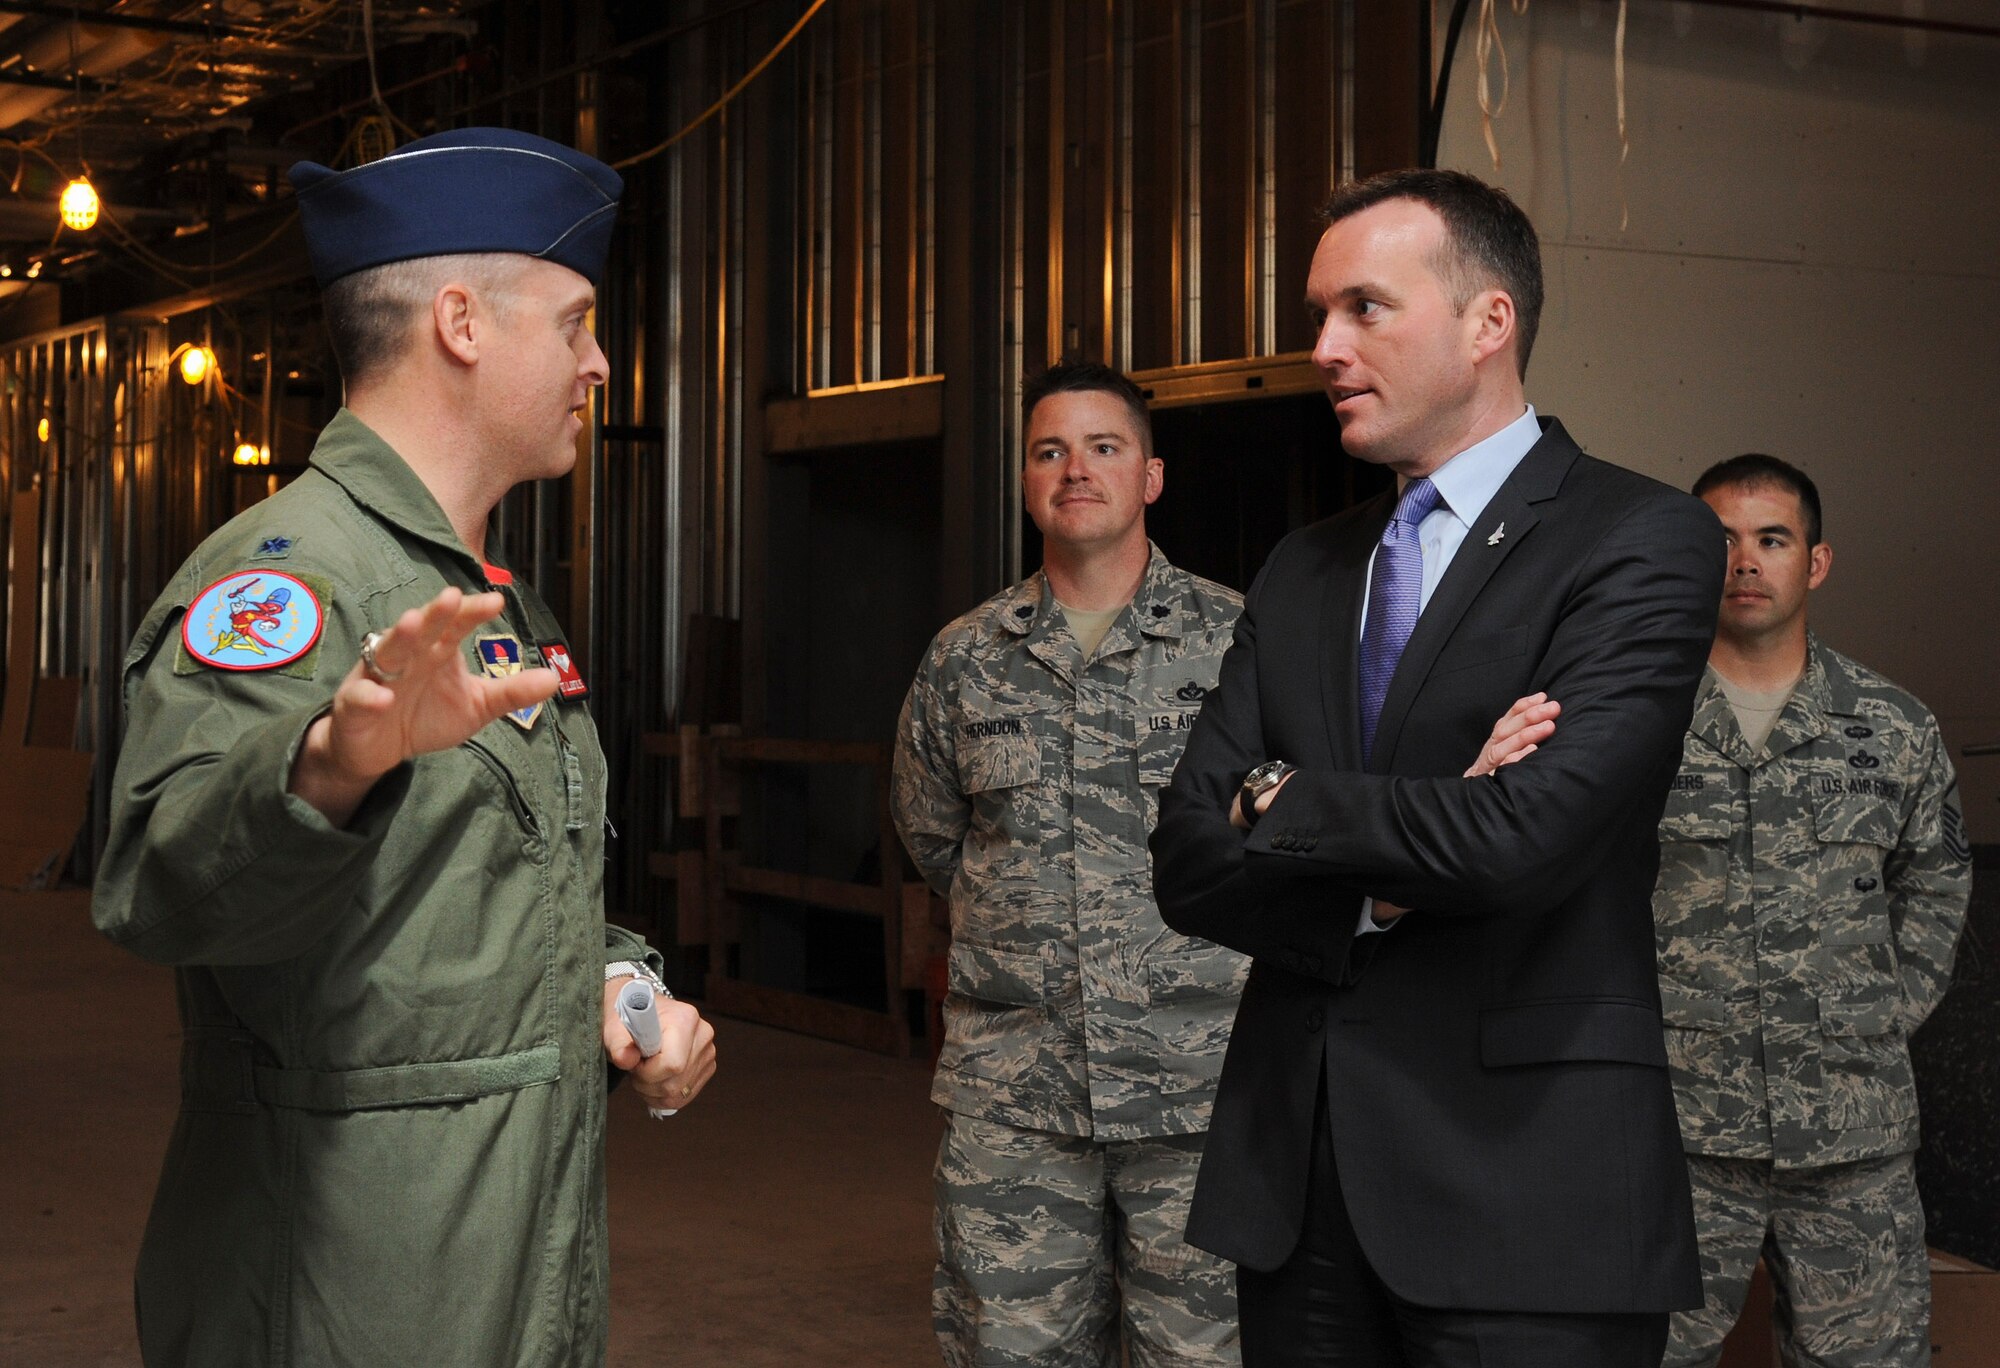 Undersecretary of the Air Force Eric Fanning is briefed by Lt. Col. Matthew Liljenstolpe, 56th Training Squadron commander, during a tour of the Academic Training Center construction site on March 14 at Luke Air Force Base. The 145,000 square-foot facility will include pilot academic training classrooms, 12 F-35 simulators, a secured briefing auditorium, and space for administrative, instructor and engineering personnel. Estimated completion date for the building is fall of 2014. Fanning was at Luke for the unveiling of the wing’s first F-35 Lightning II fighter jet. (U.S. Air Force photo by Staff Sgt. Darlene Seltmann)